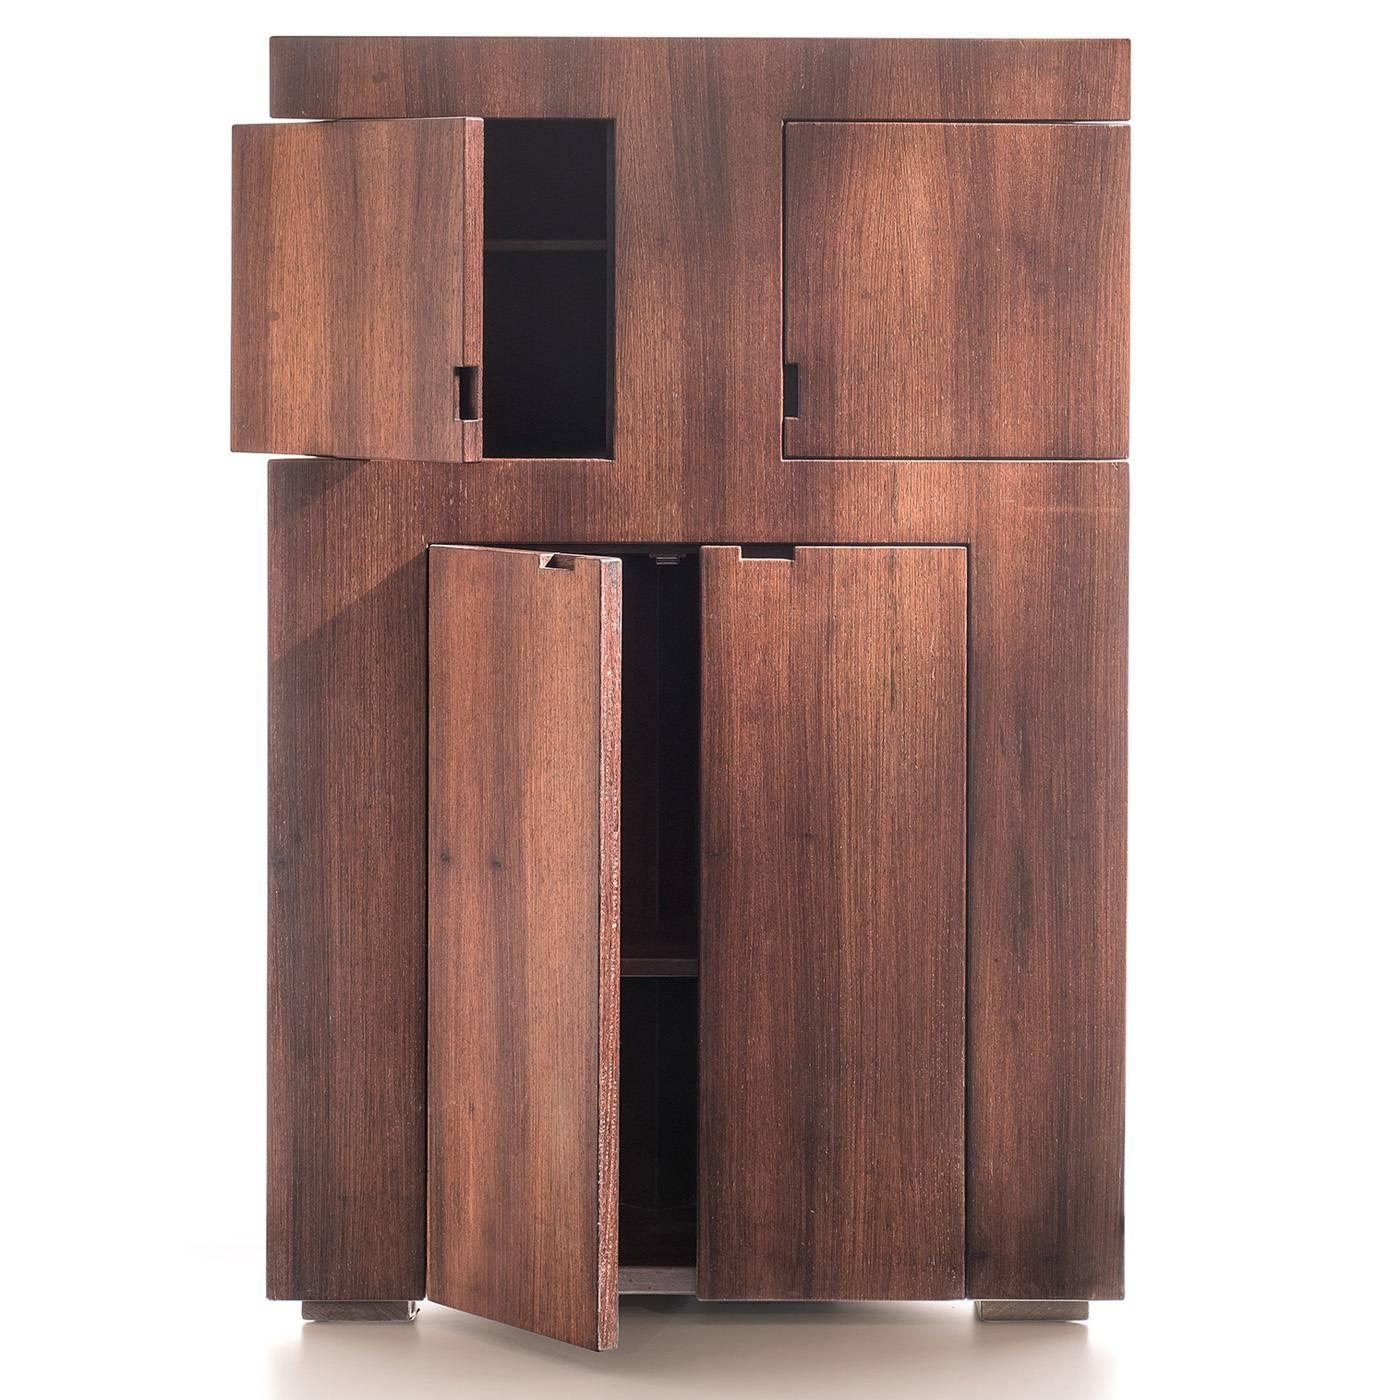 This elegant cabinet in smooth wenghe wood features four doors and two windows that open as a double-panel, swinging horizontally and giving the piece an interesting shape when used.